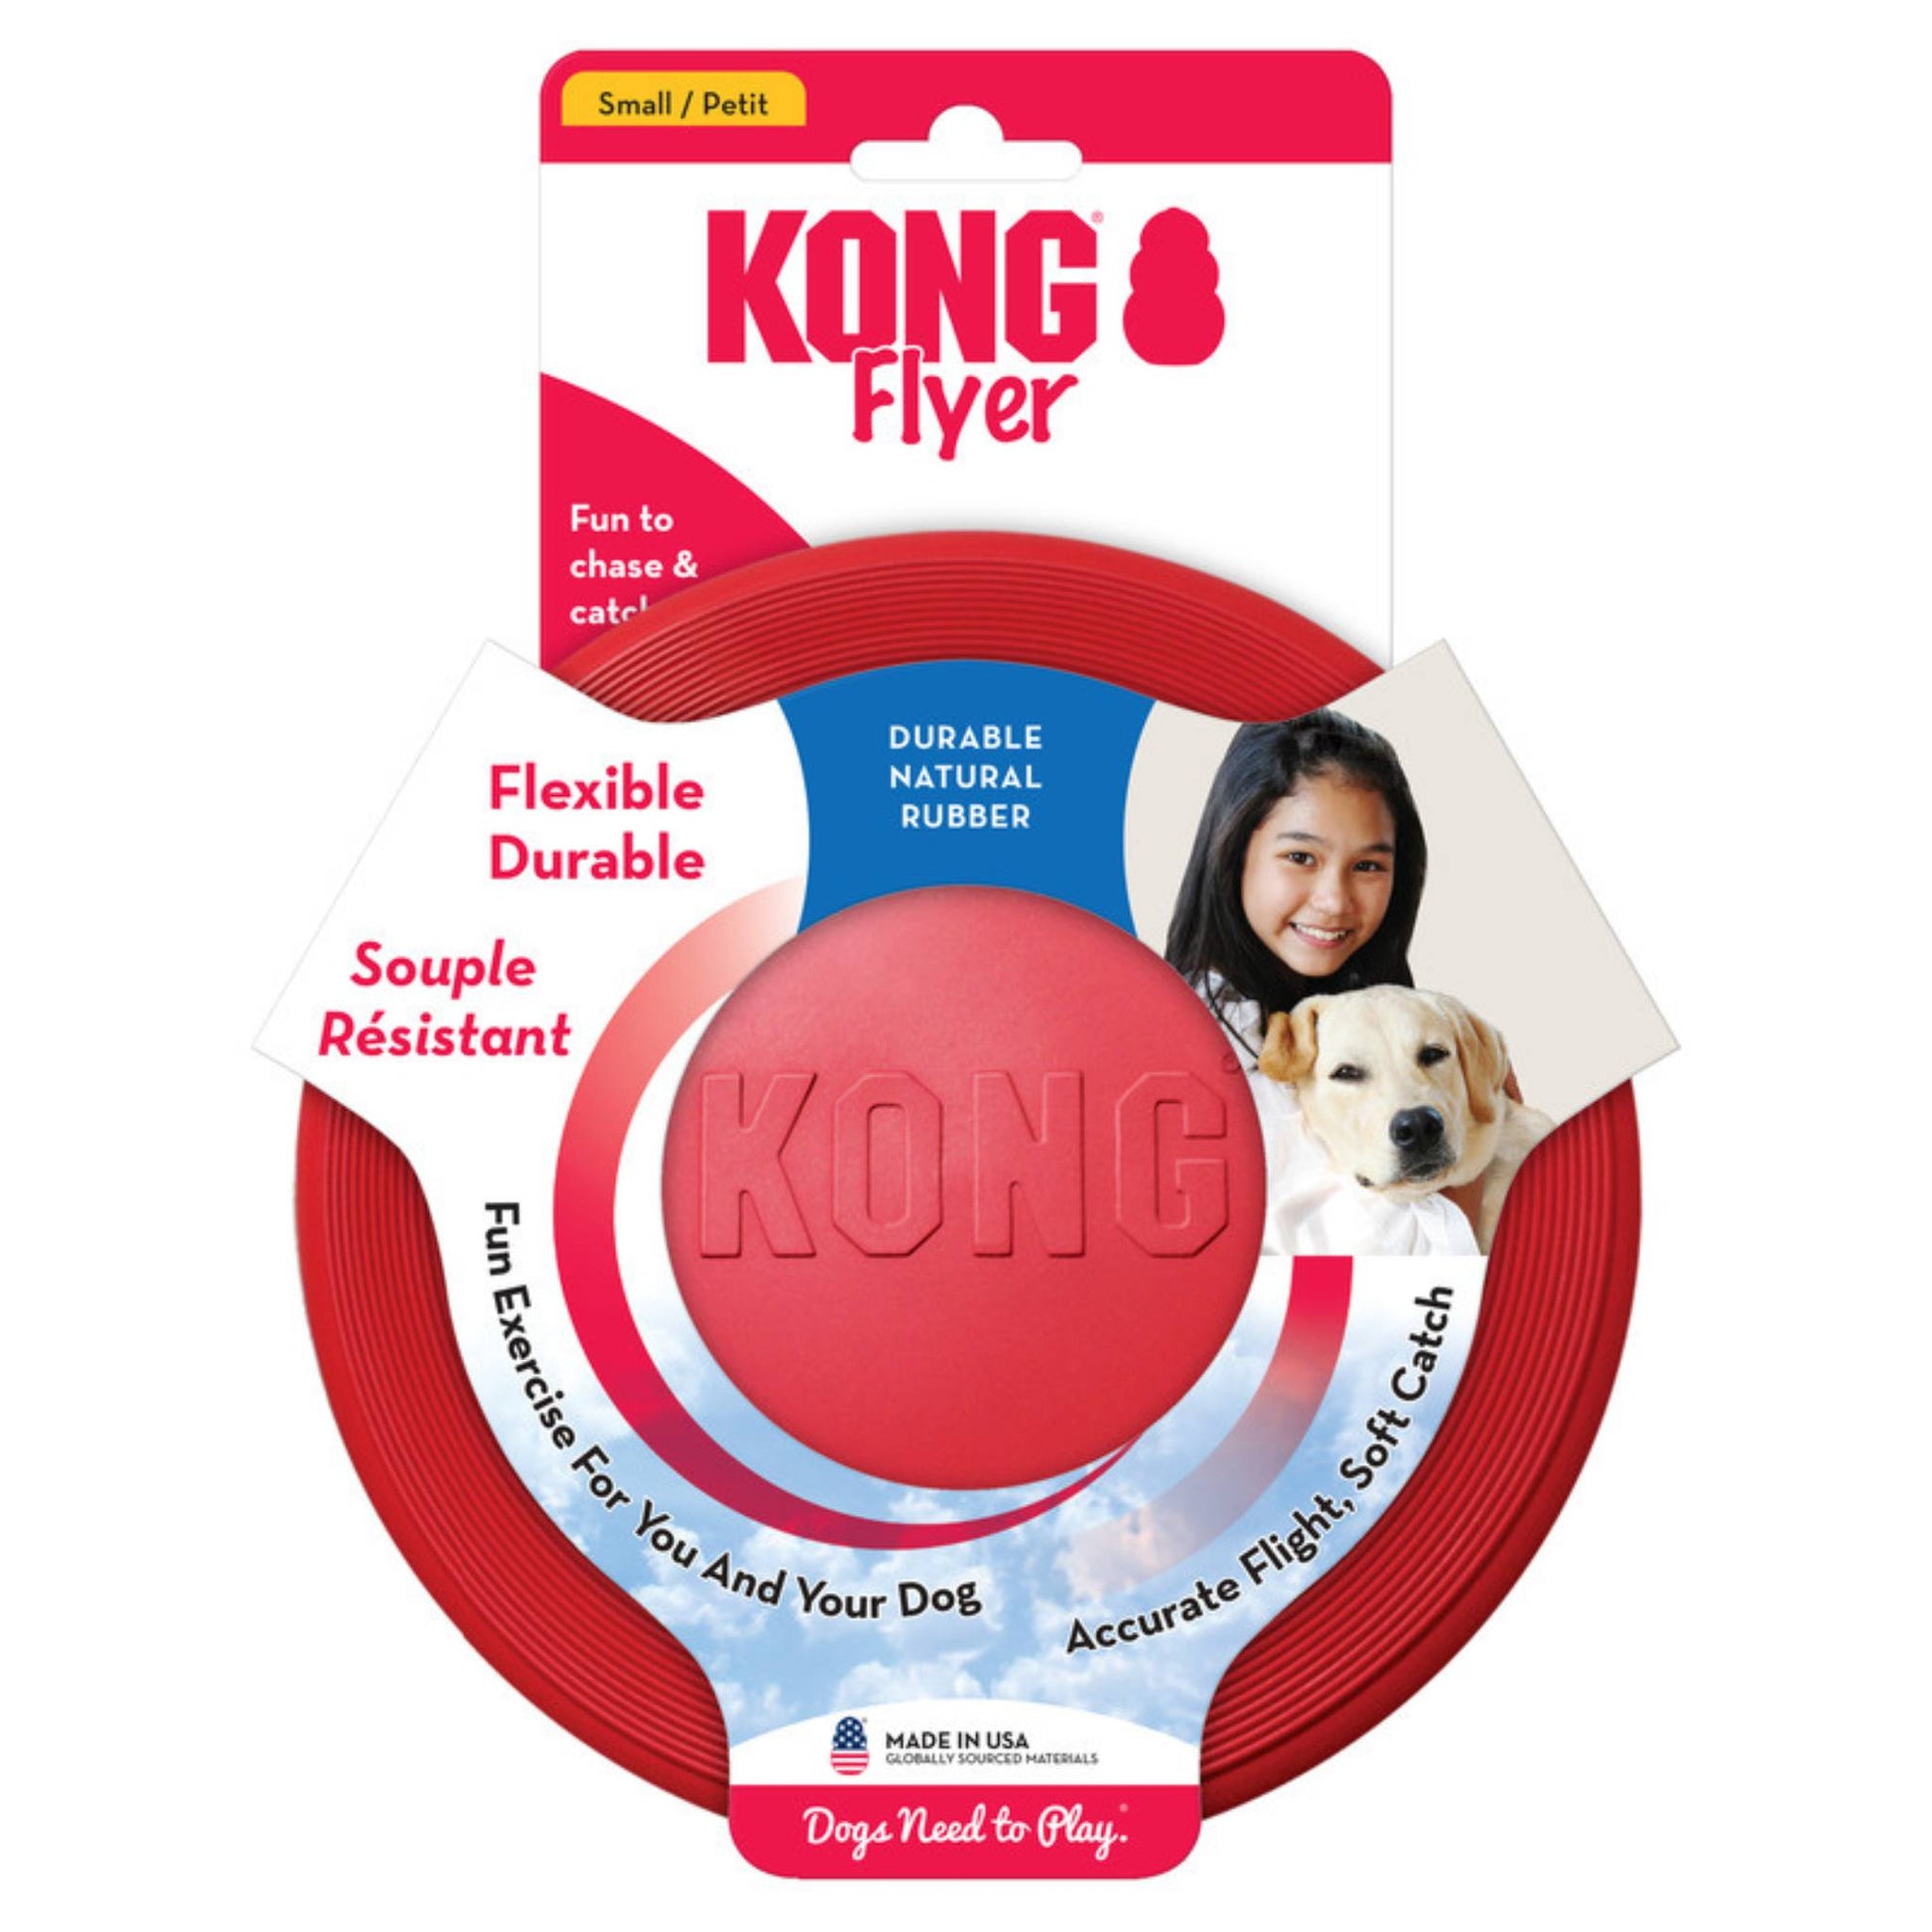 KONG Flyer dog toy